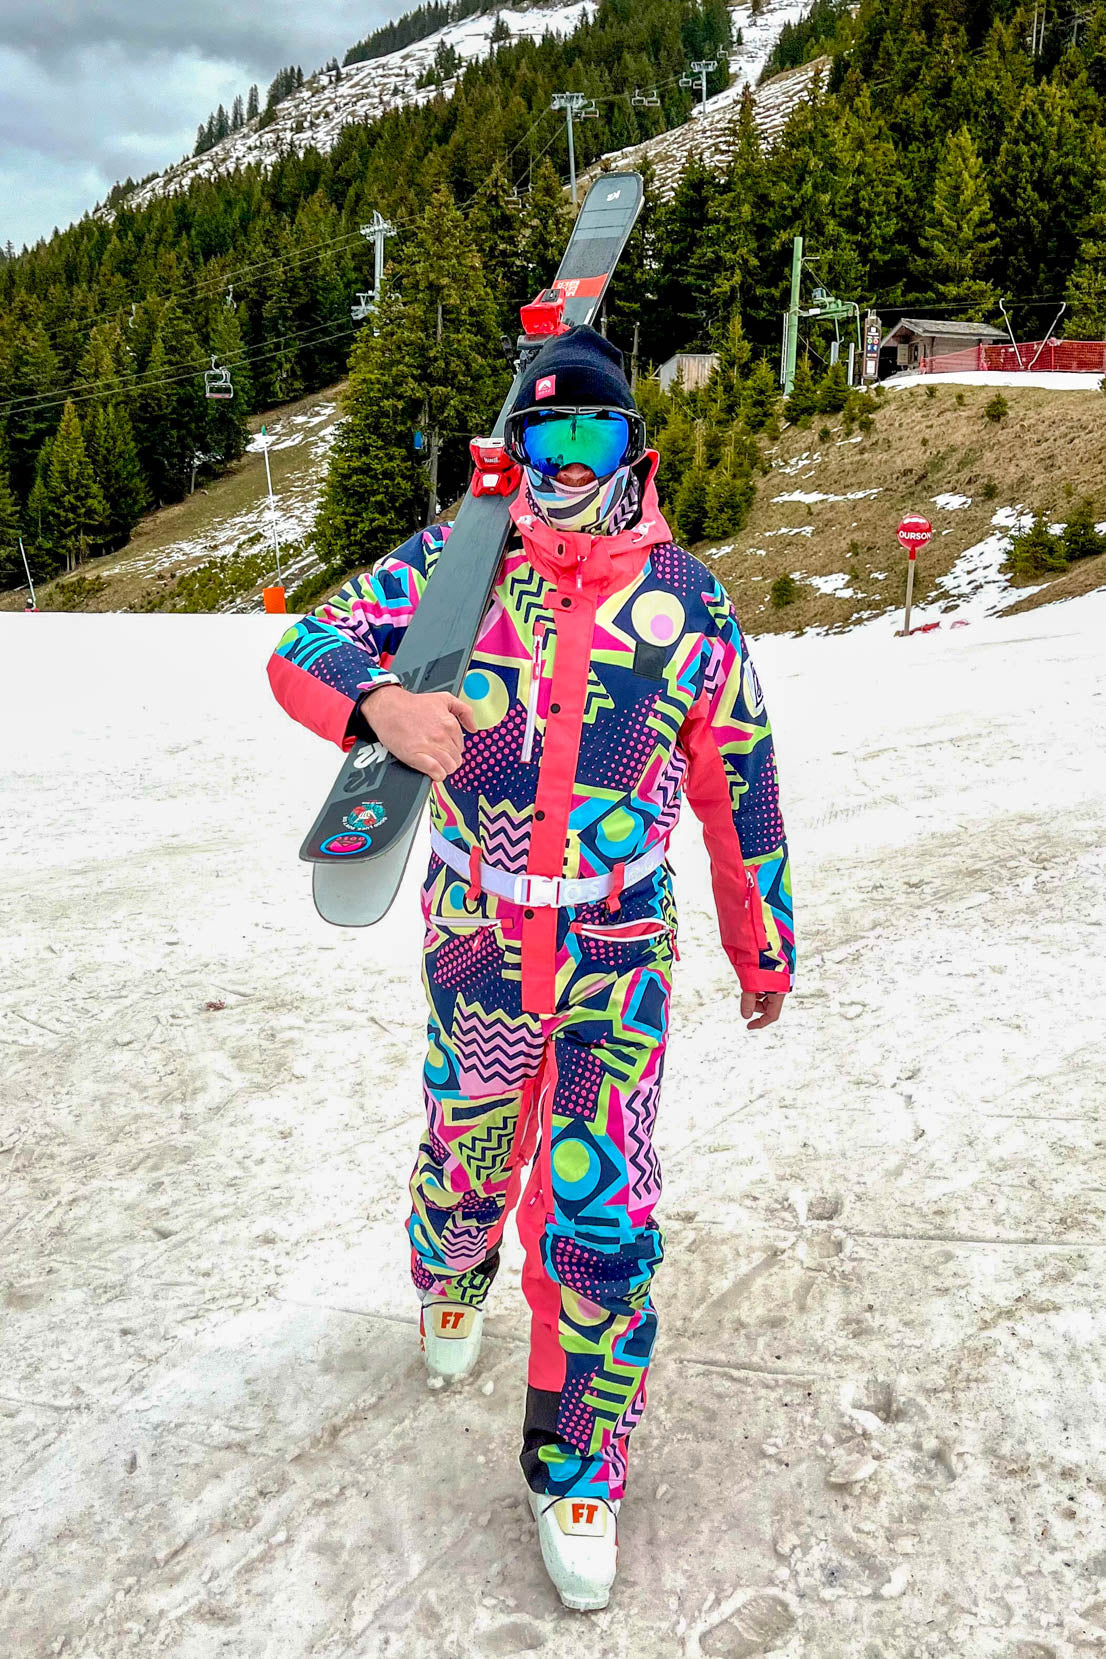 Saved by The Bell Men's Ski Suit